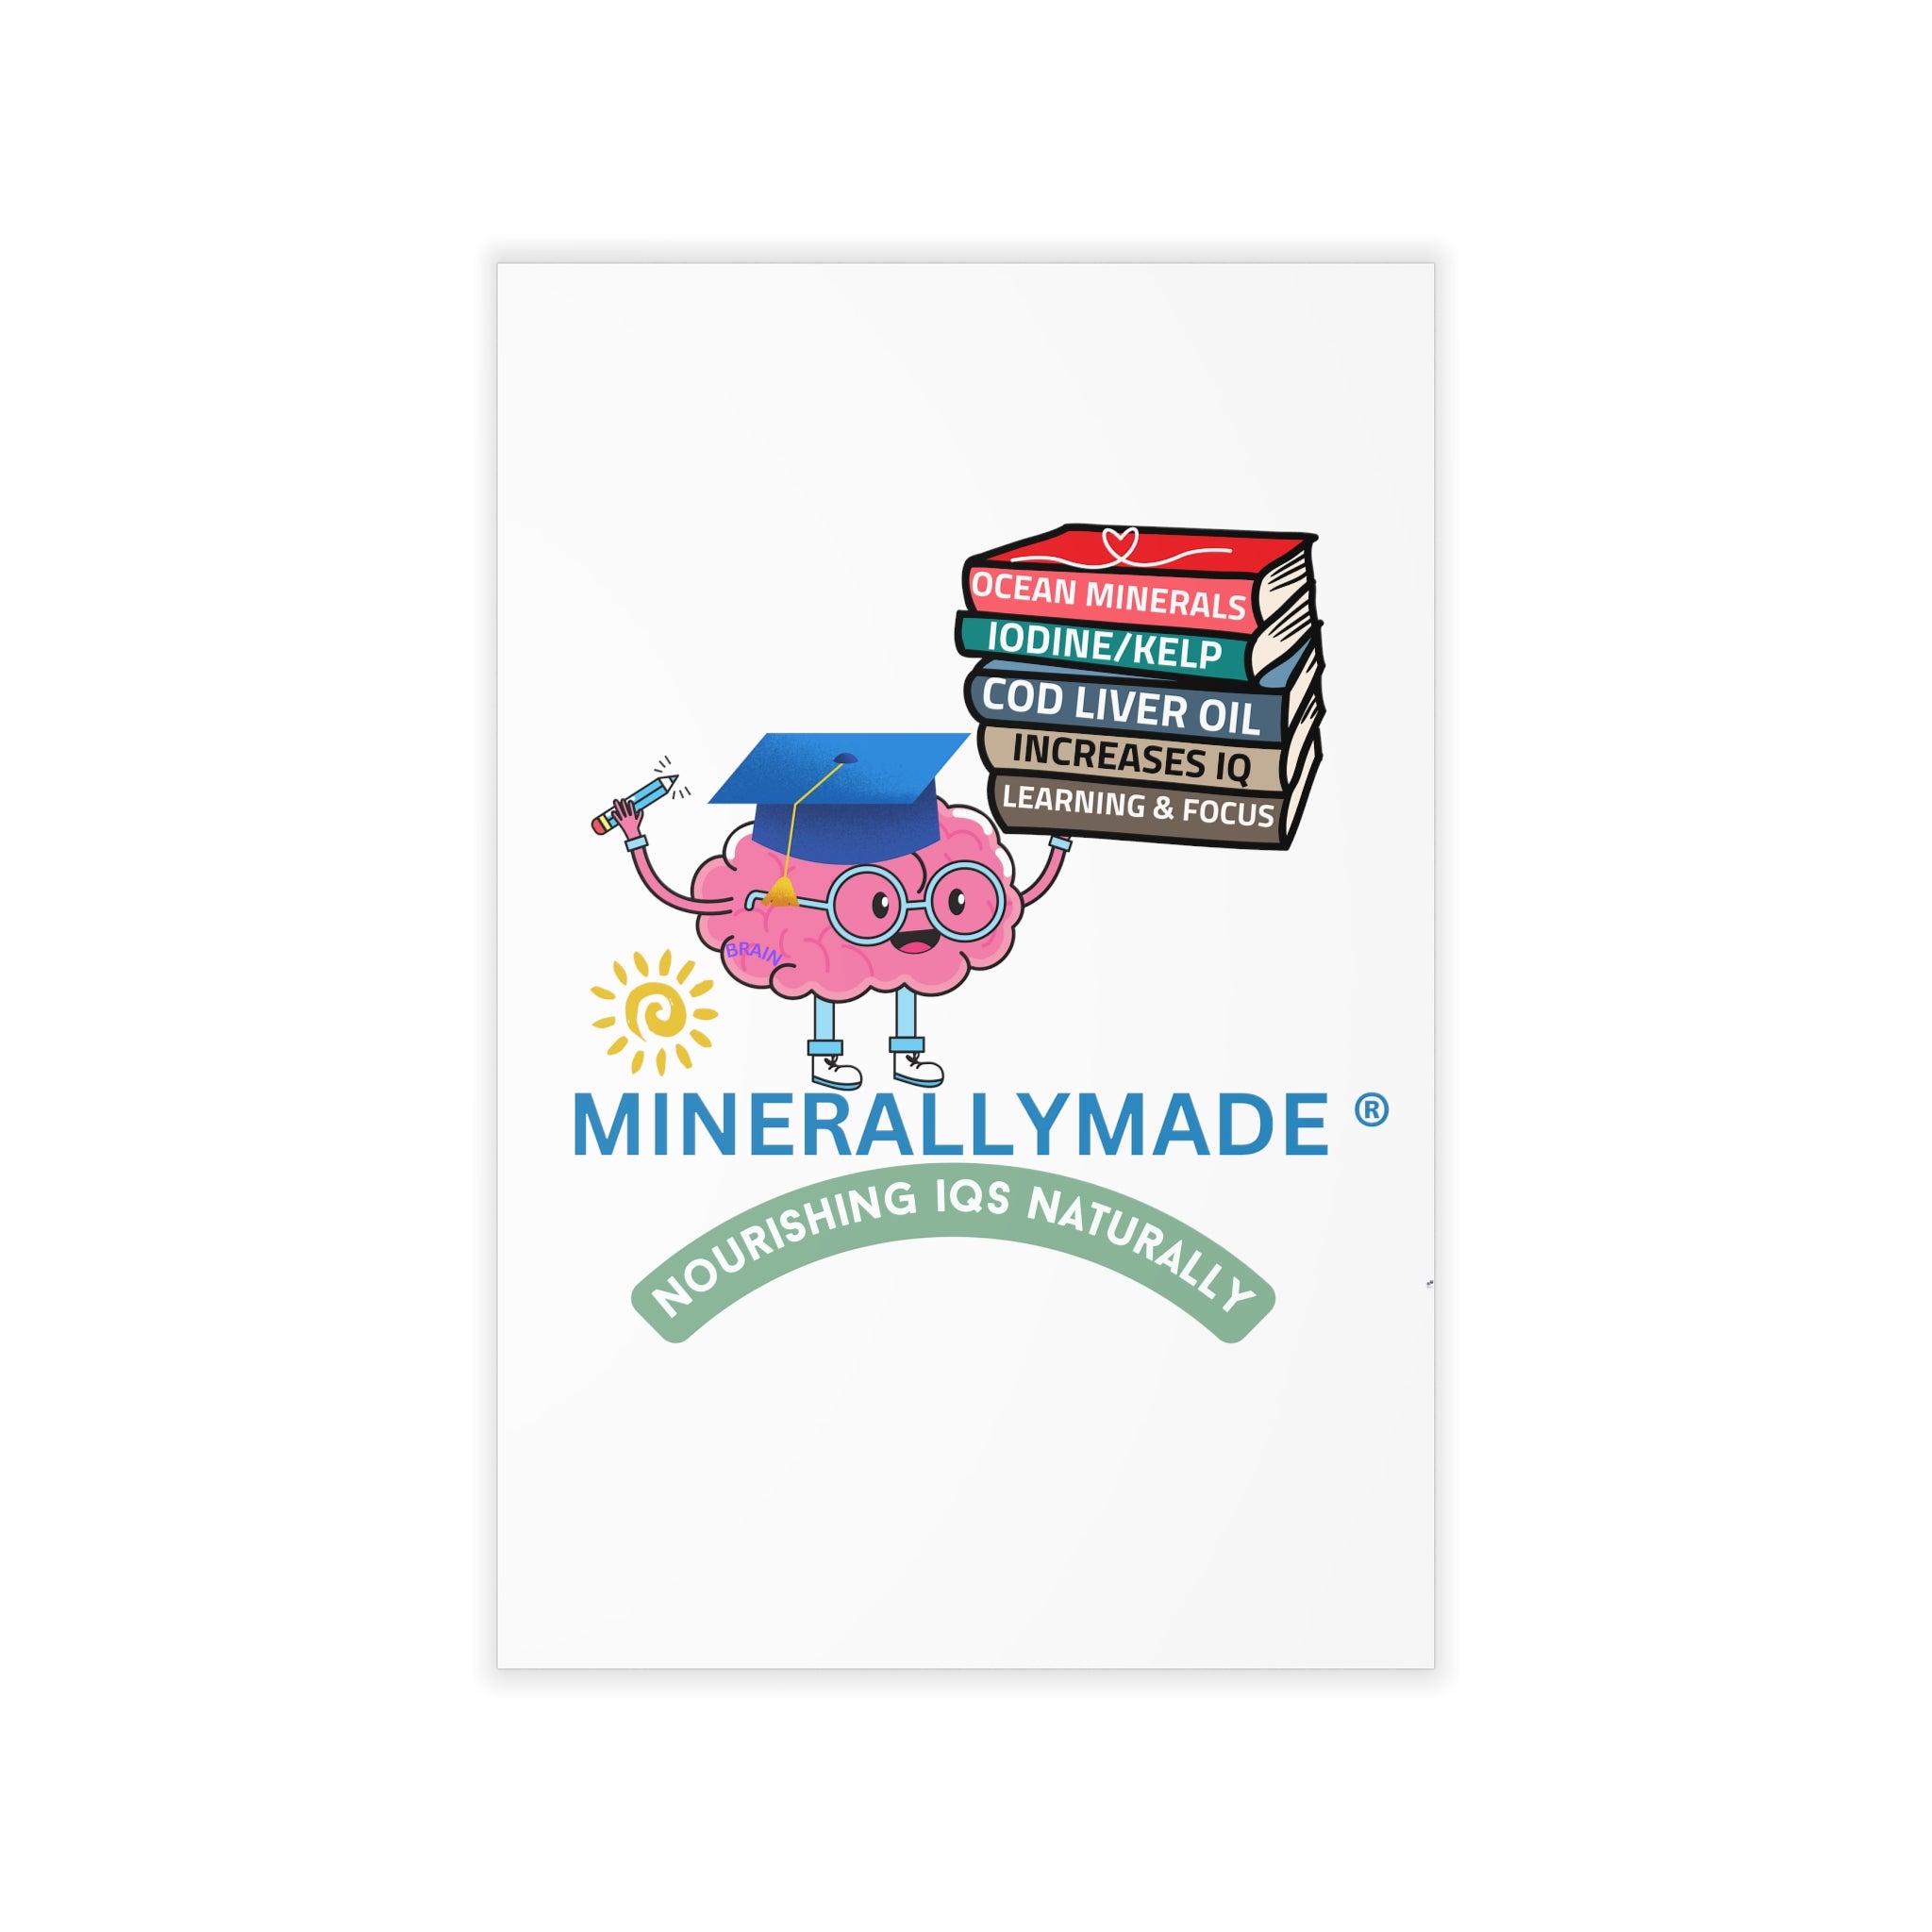 Minerallymade | Nourishing IQs Naturally | Kid's Wall Decals